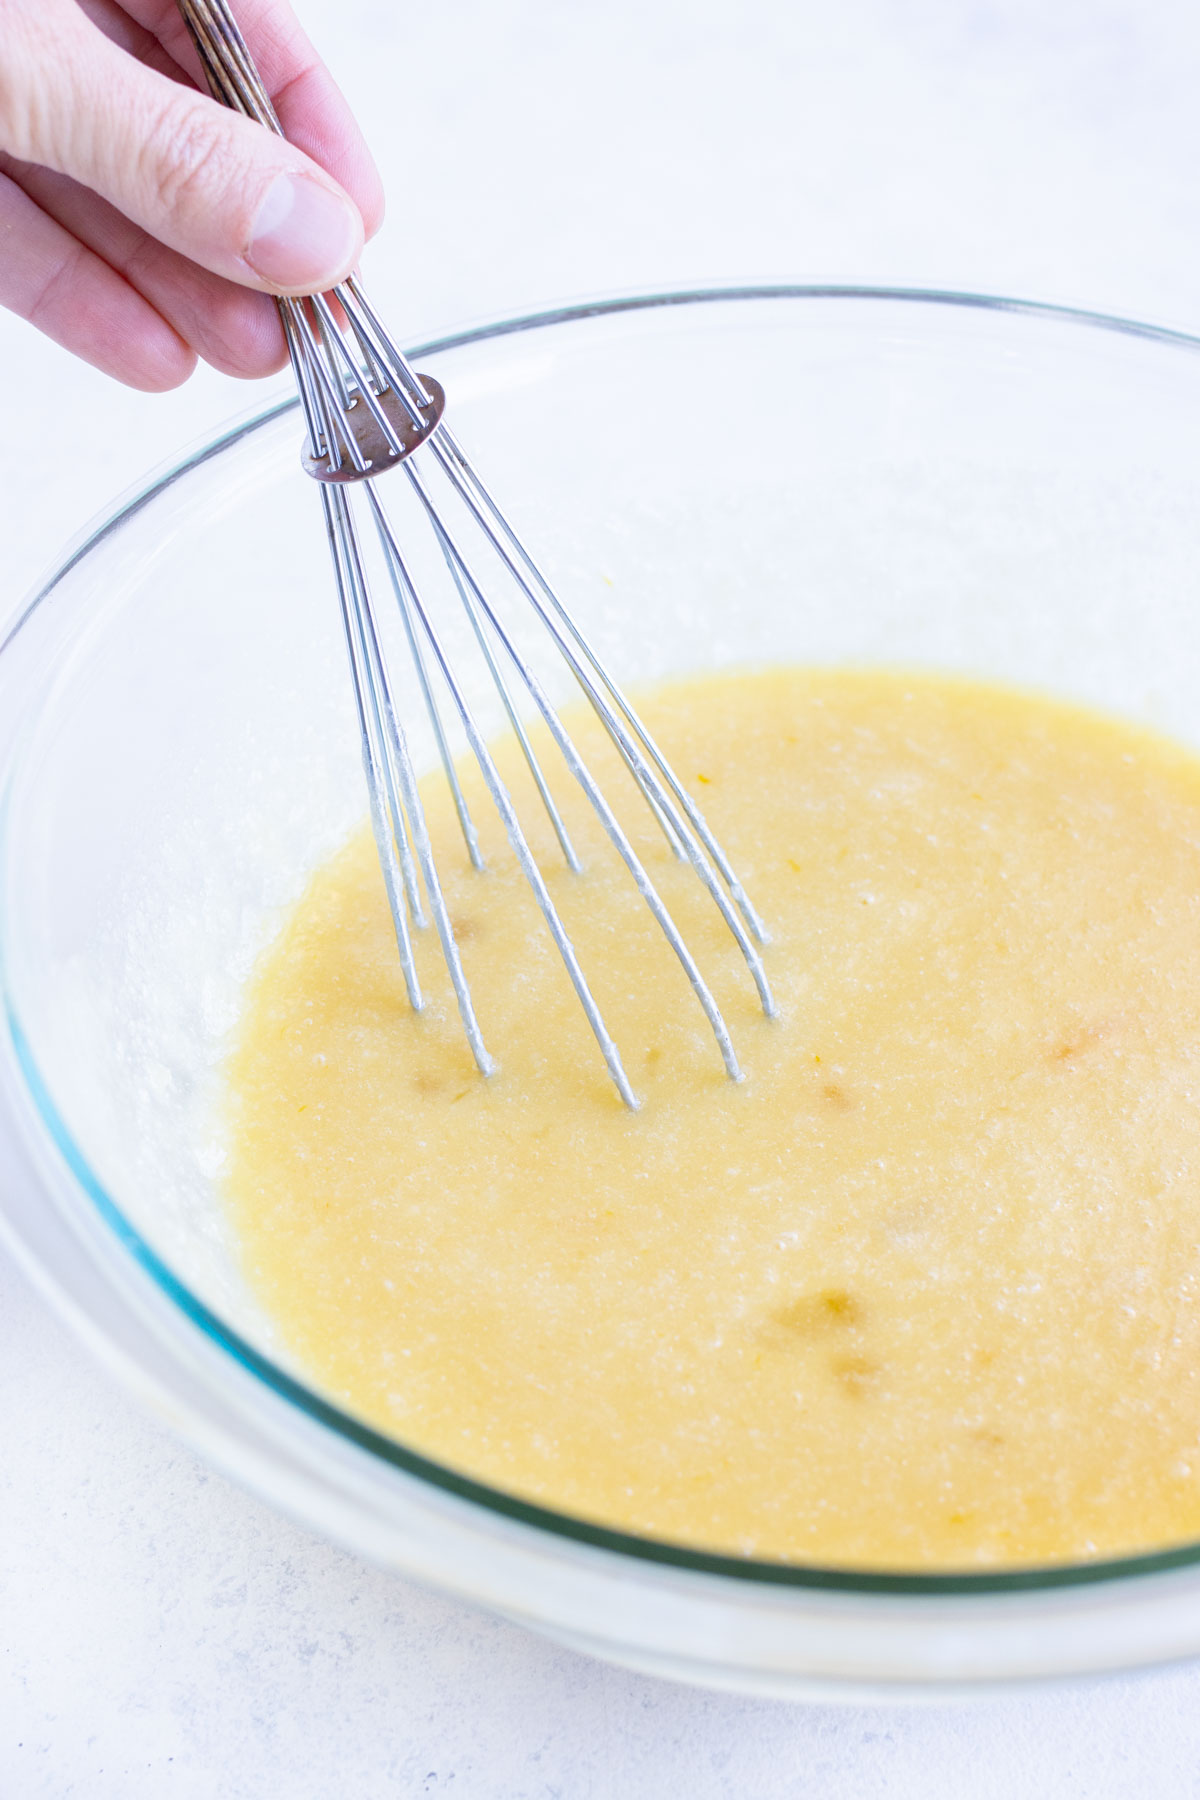 Eggs, milk, and other wet ingredients are mixed together in a separate bowl.